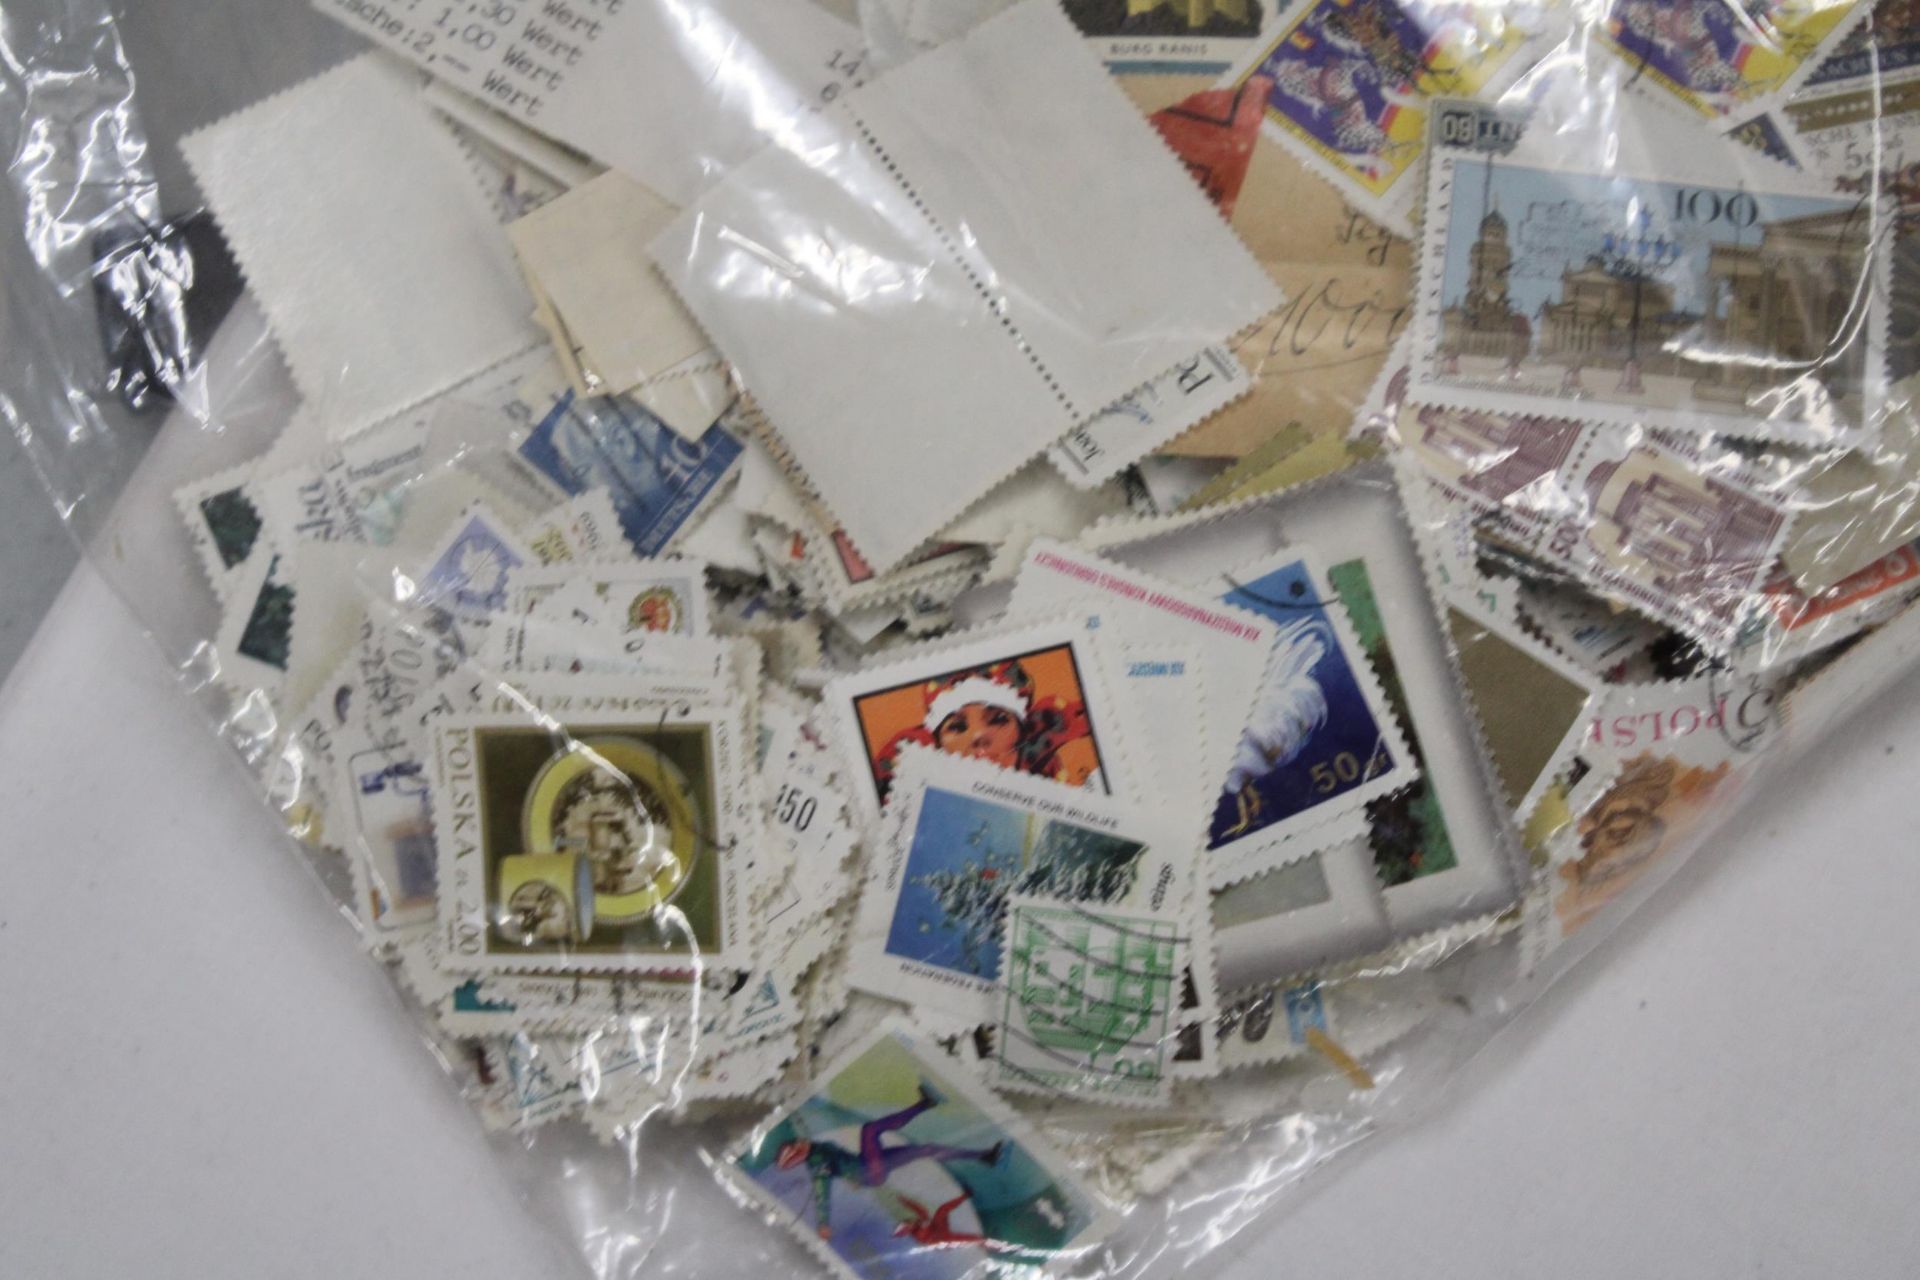 A LARGE QUANTITY OF LOOSE STAMPS FROM AROUND THE WORLD - Image 6 of 6